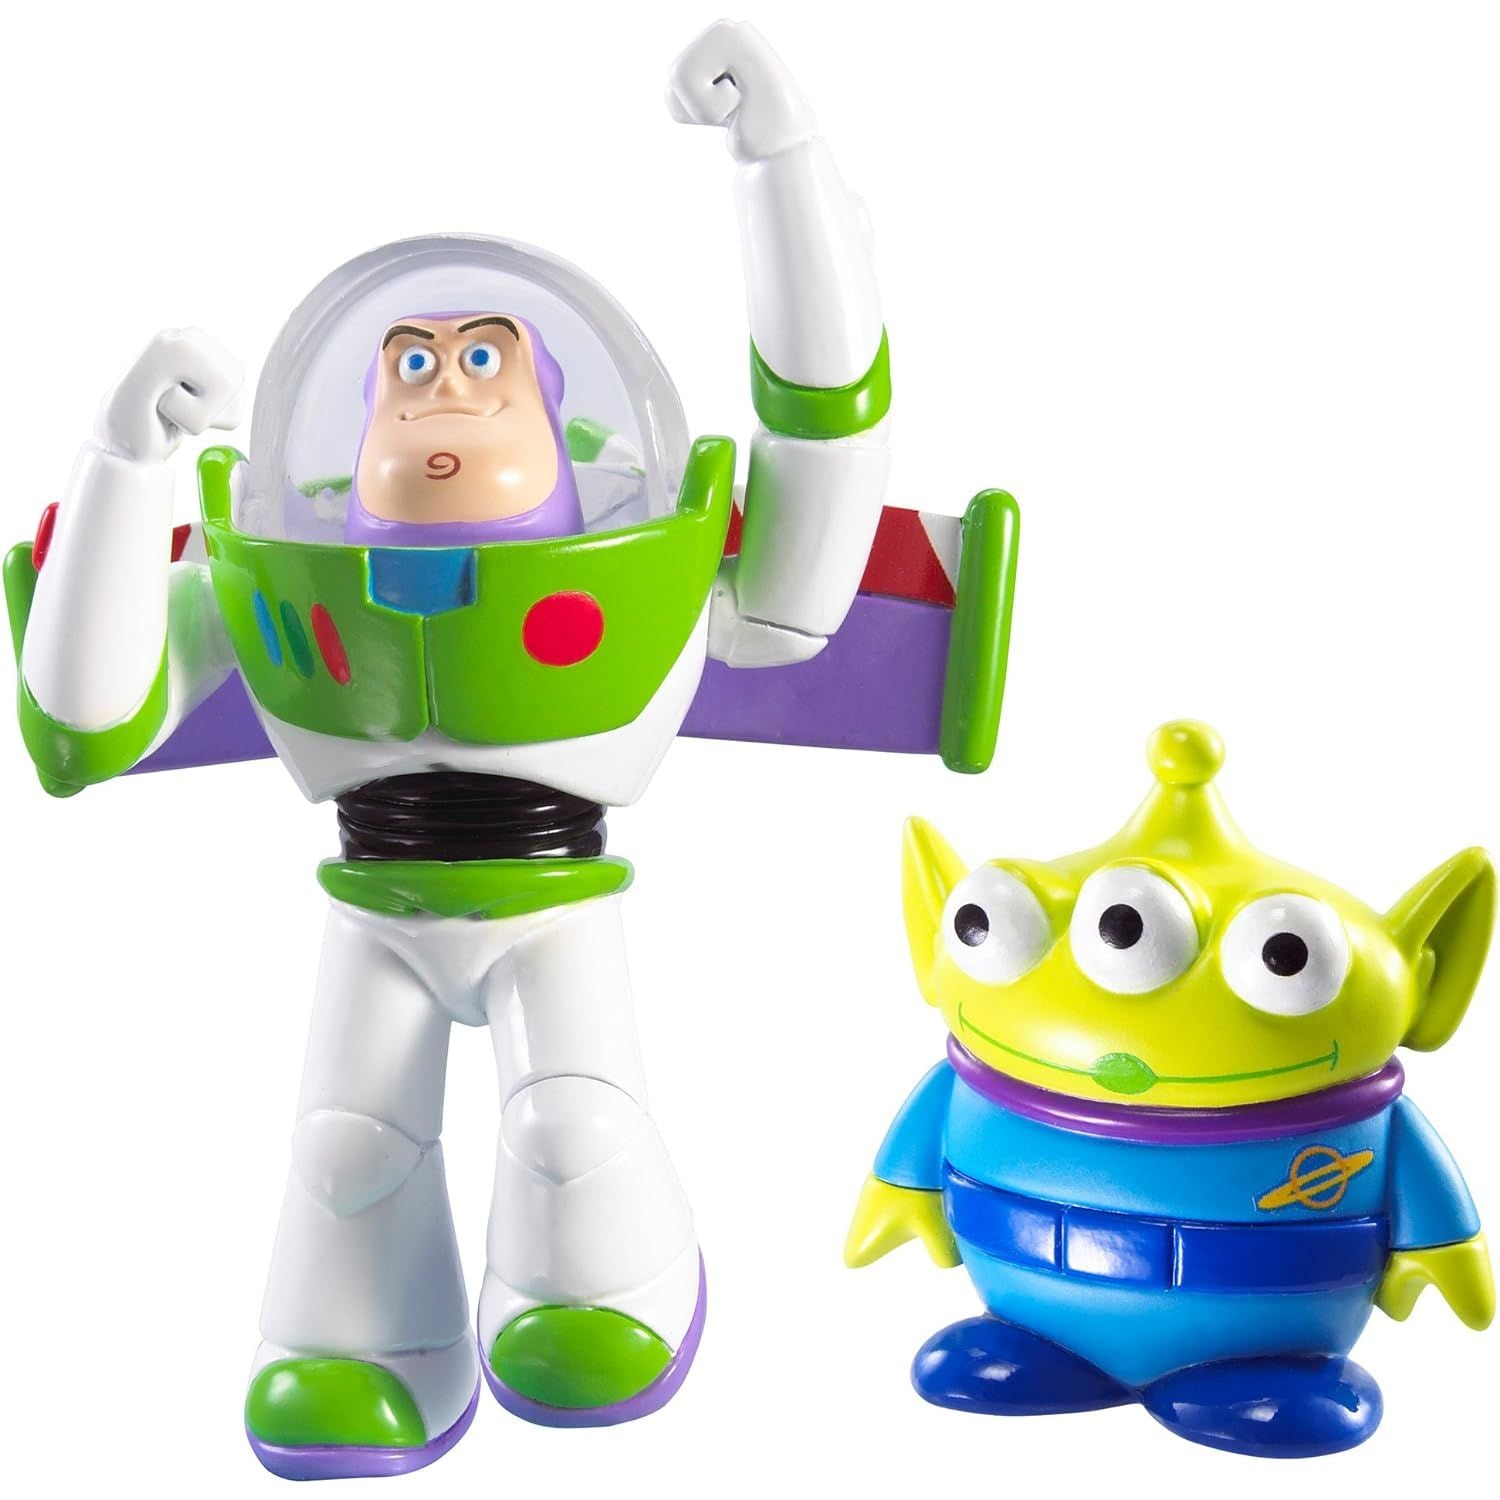 Disney Toy Story Flying Buzz Lightyear and Alien  Toy Figurines 